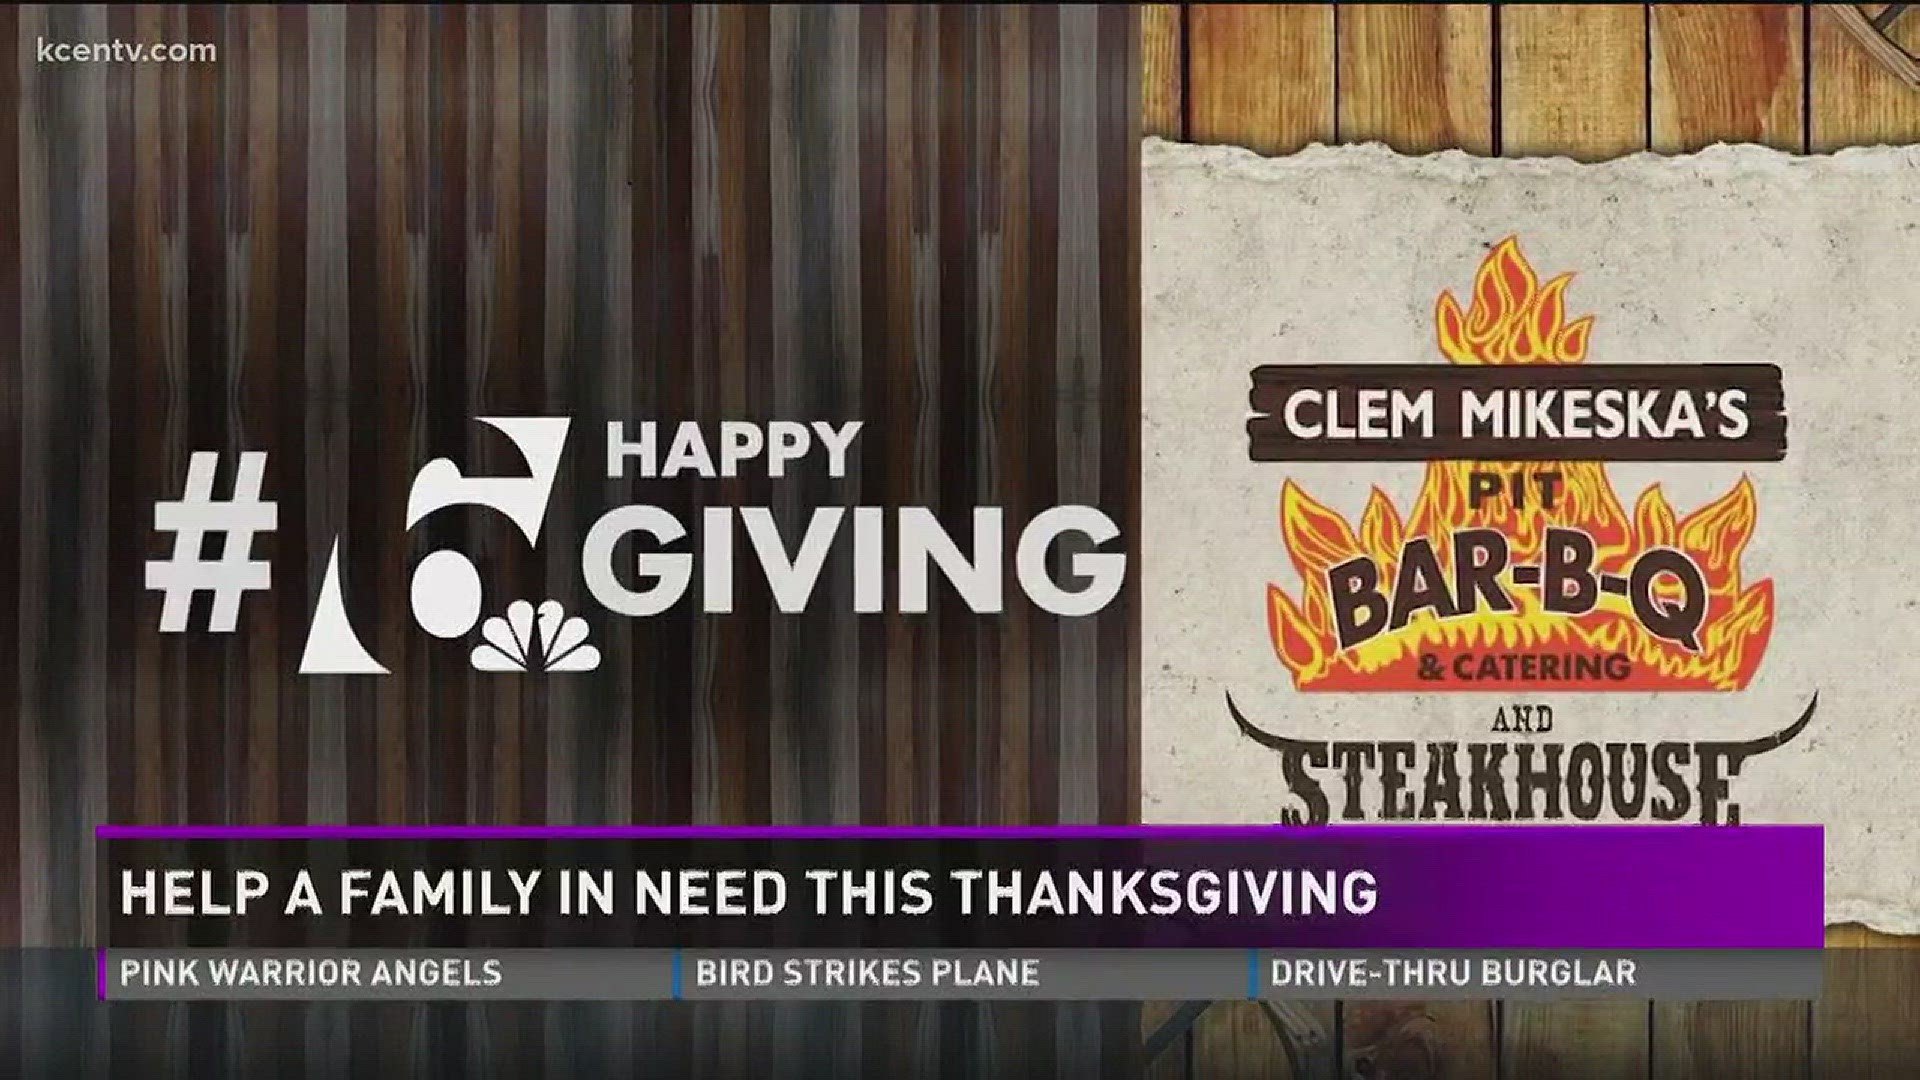 Do you know a family in need this Thanksgiving?